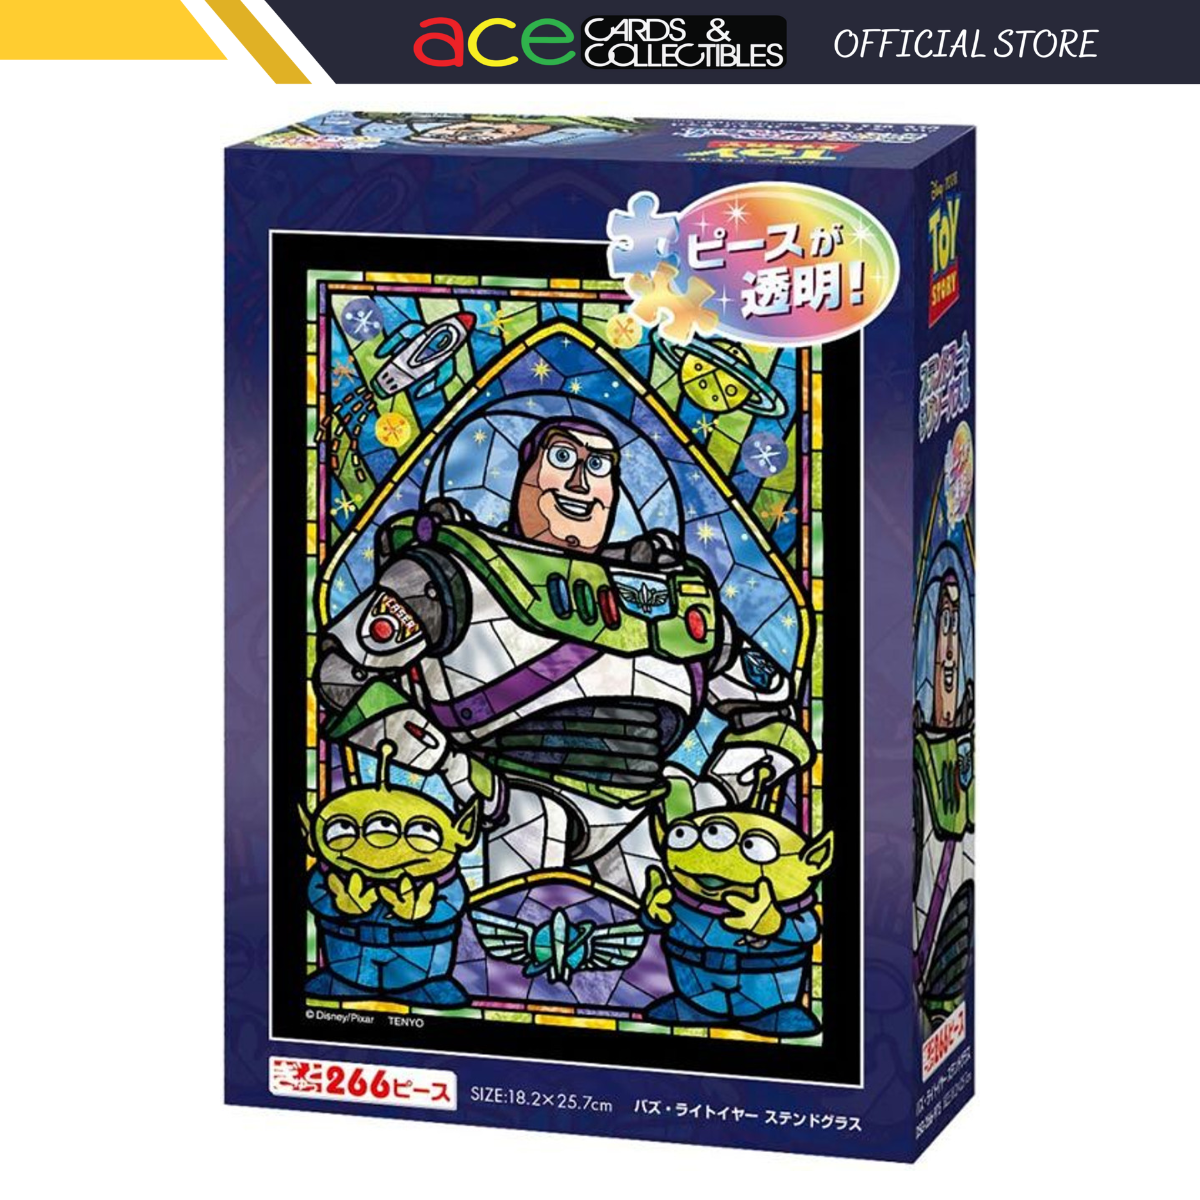 Tenyo Jigsaw Puzzle DSG266-975 Disney Buzz Lightyear Stained Art (266 Pieces)-Tenyo-Ace Cards & Collectibles